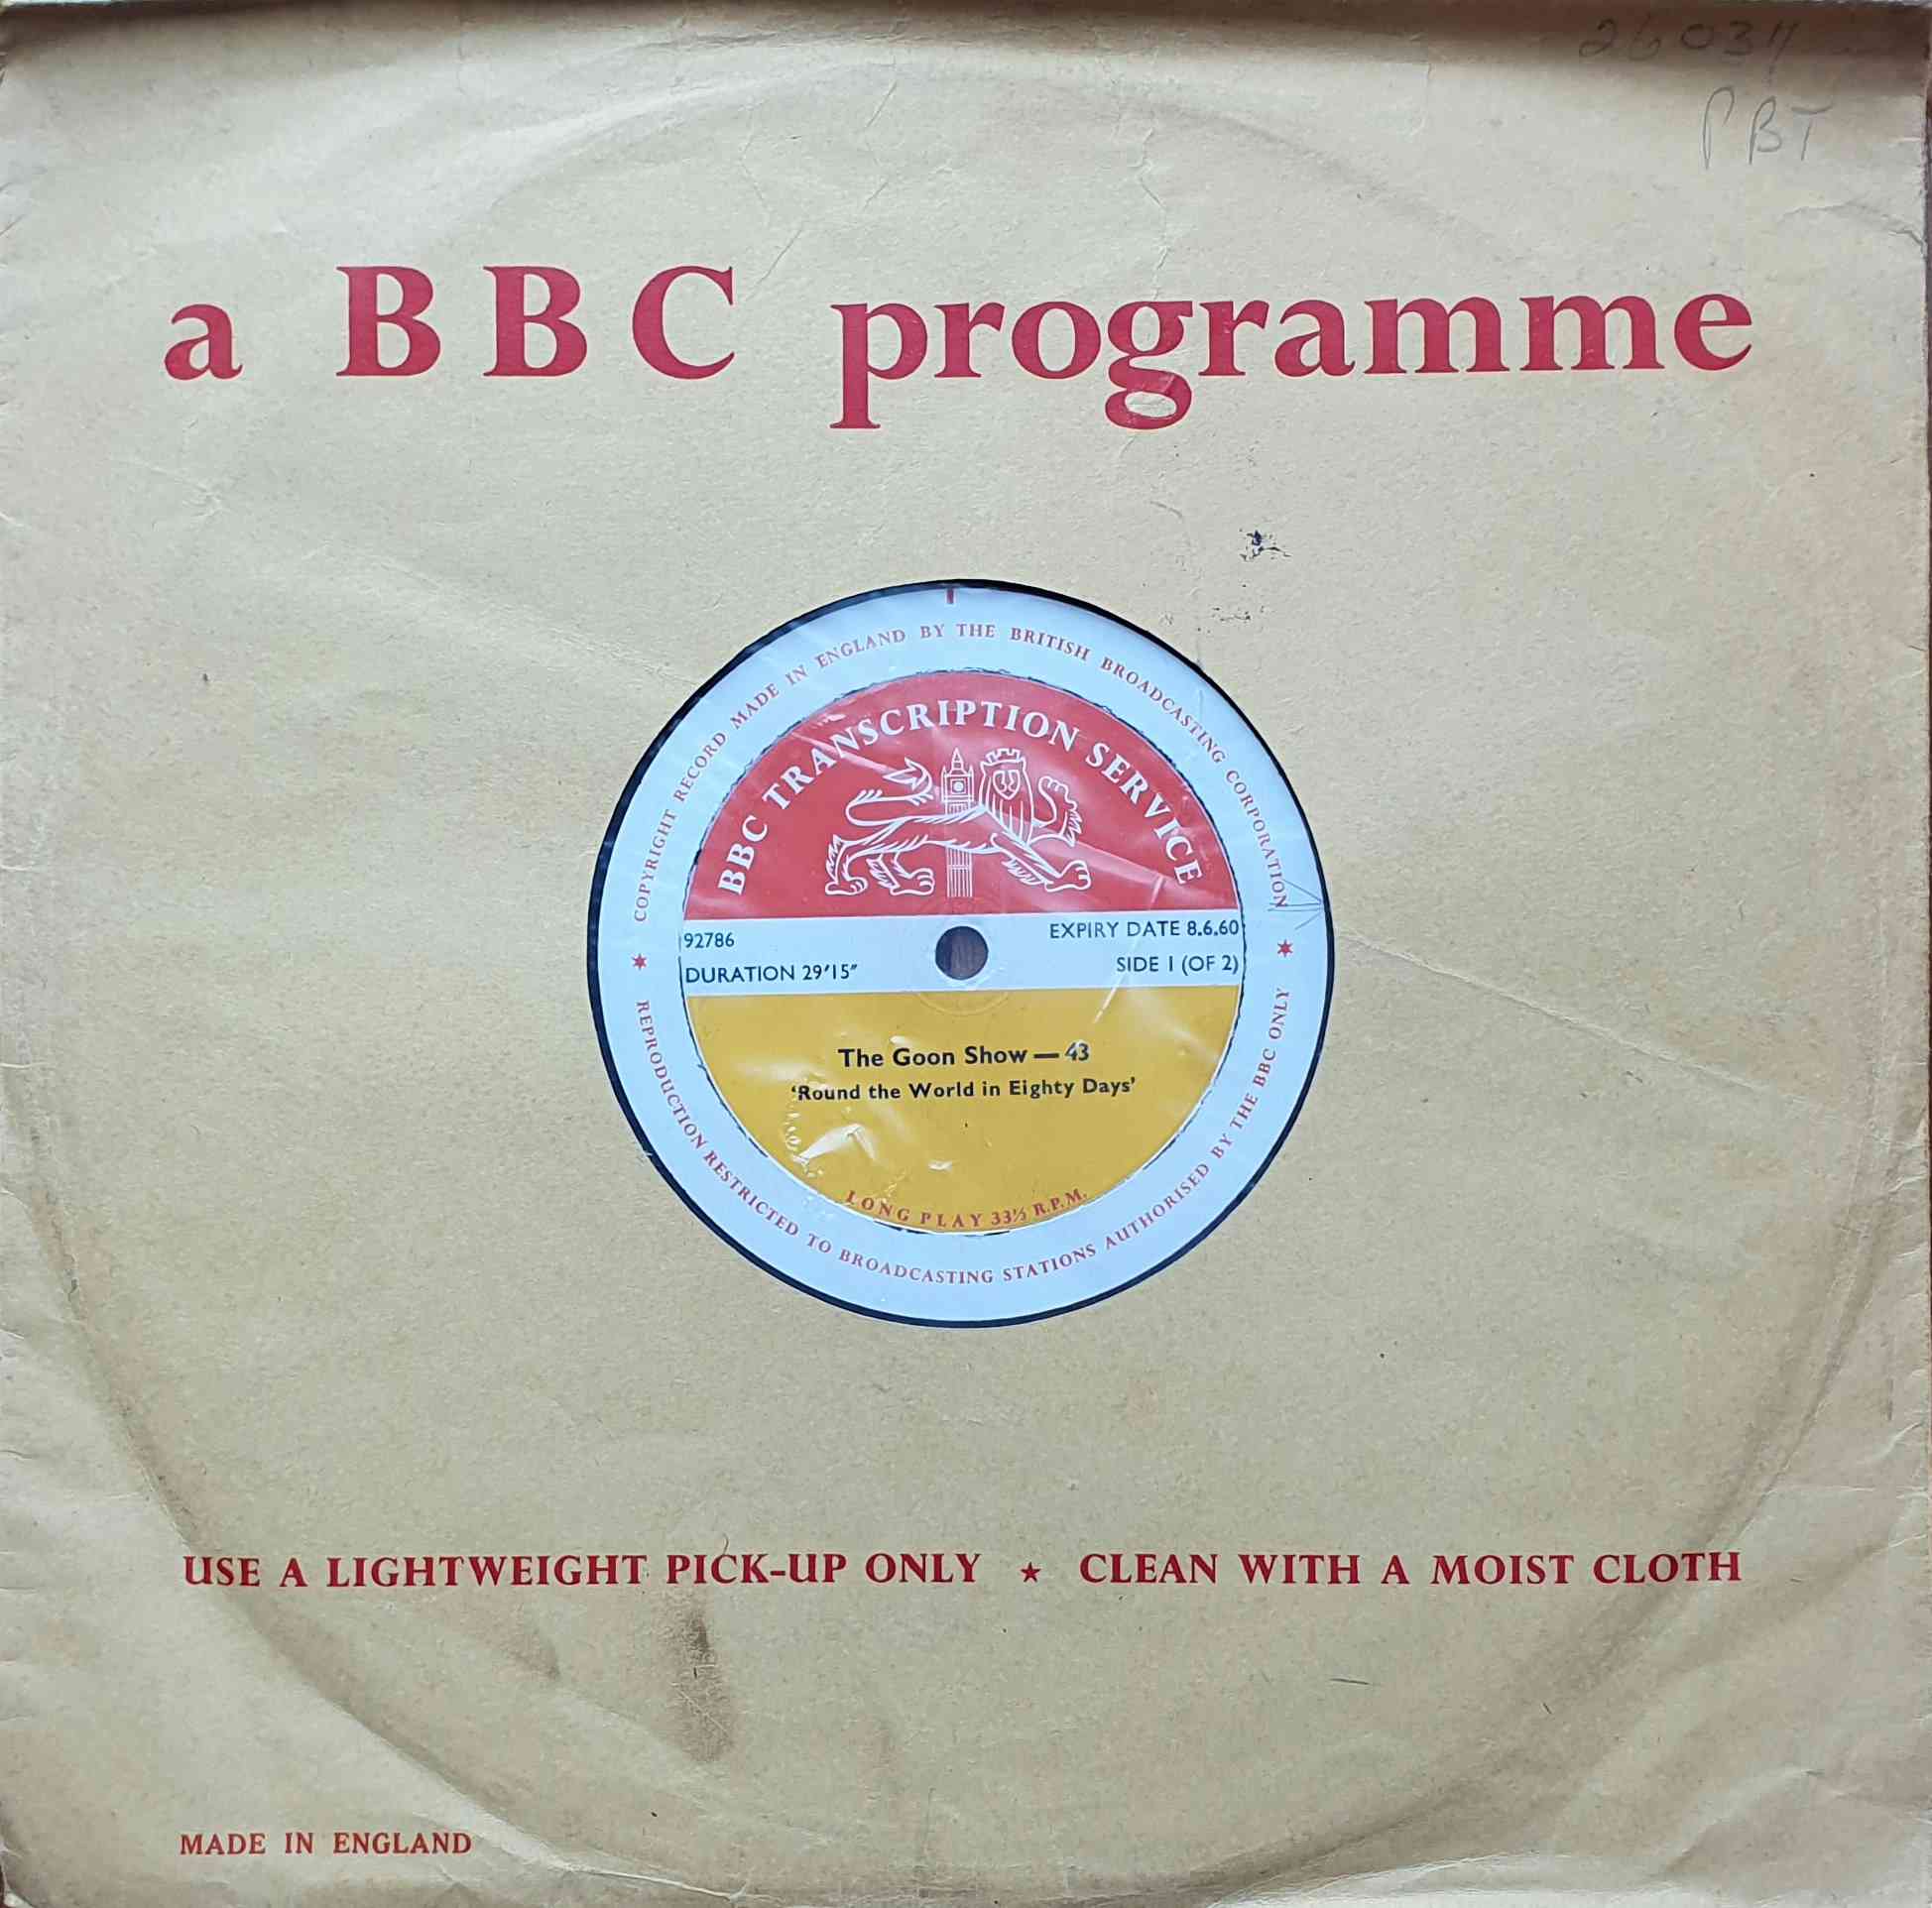 Picture of The Goon Show - 43 / 44 (Side 1 of 2) by artist Unknown from the BBC 10inches - Records and Tapes library